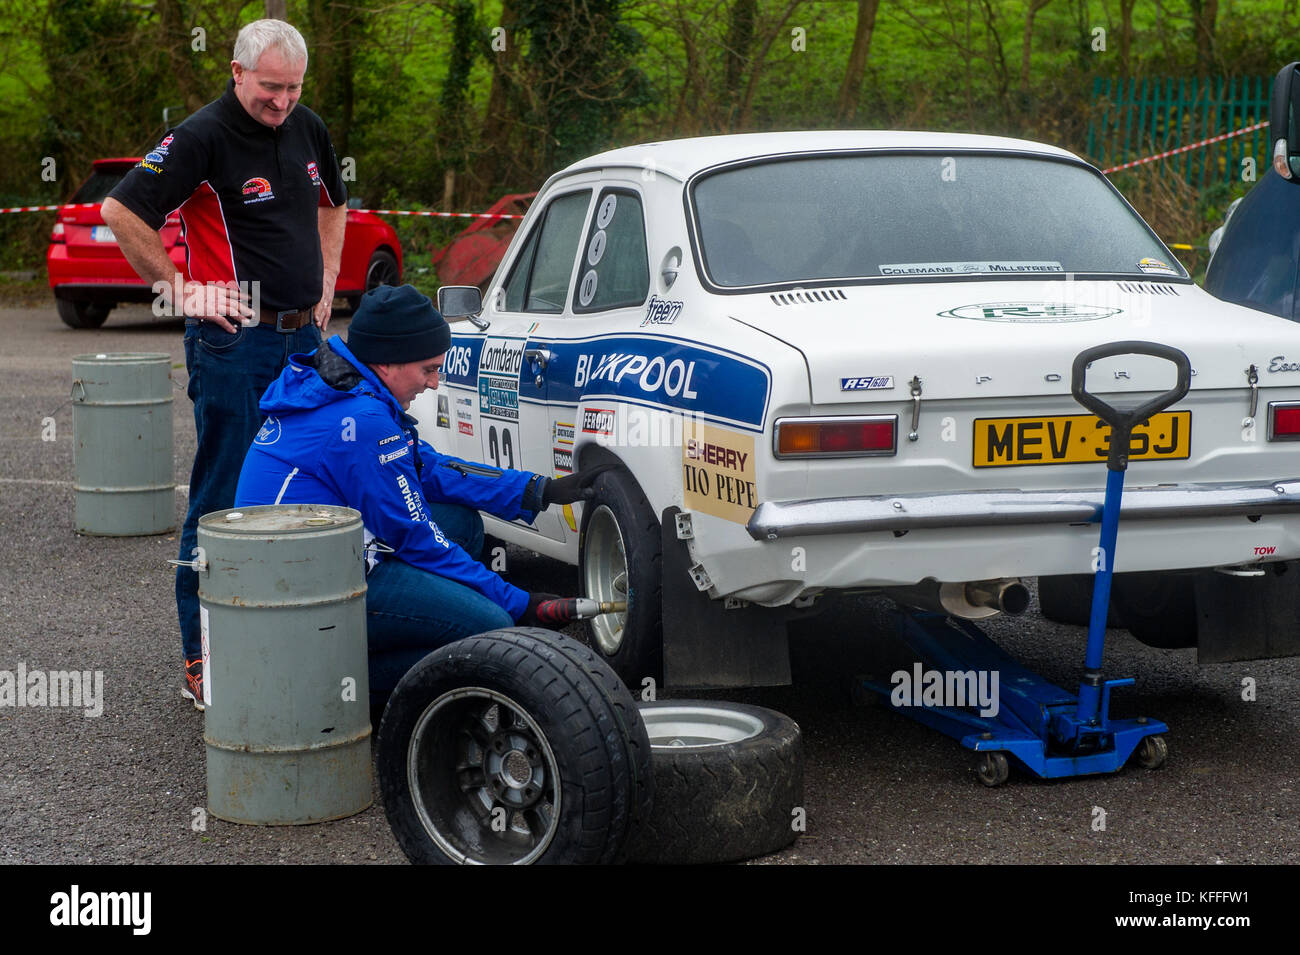 Bantry, Ireland. Saturday 28th Oct, 2017.  A rally car competing in tomorrow's West Cork Fastnet Rally has one of its wheels changed during scrutineering.  The rally starts early torrow morning from The West Lodge Hotel in Bantry and takes in the local countryside before finishing tomorrow afternoon. Credit: Andy Gibson/Alamy Live News. Stock Photo